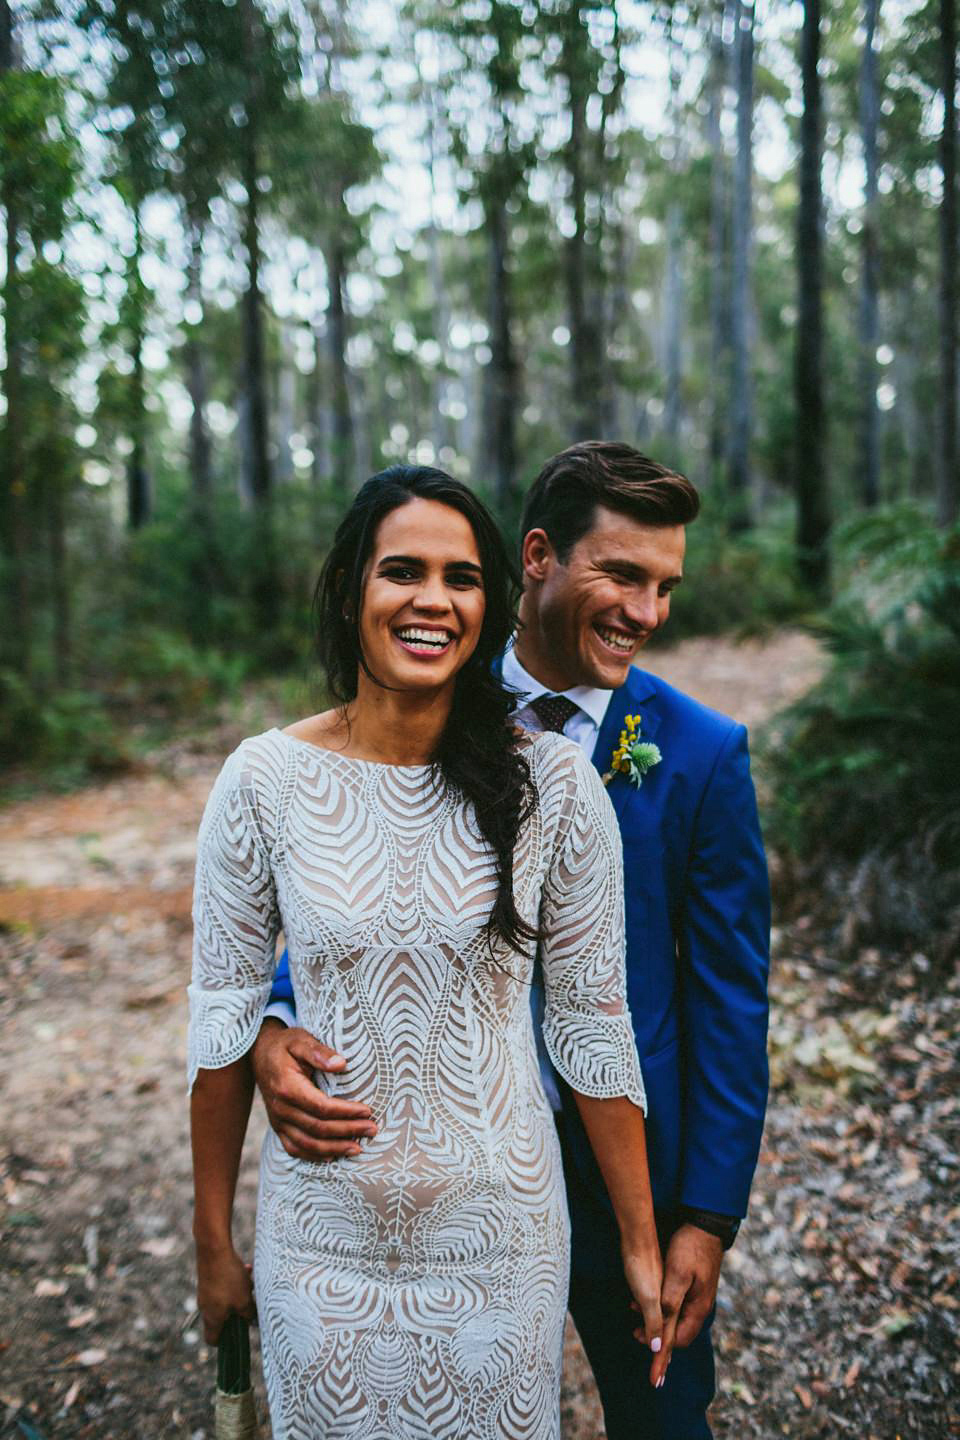 A woodland wedding in Australia. Images by Through The Woods We Ran.